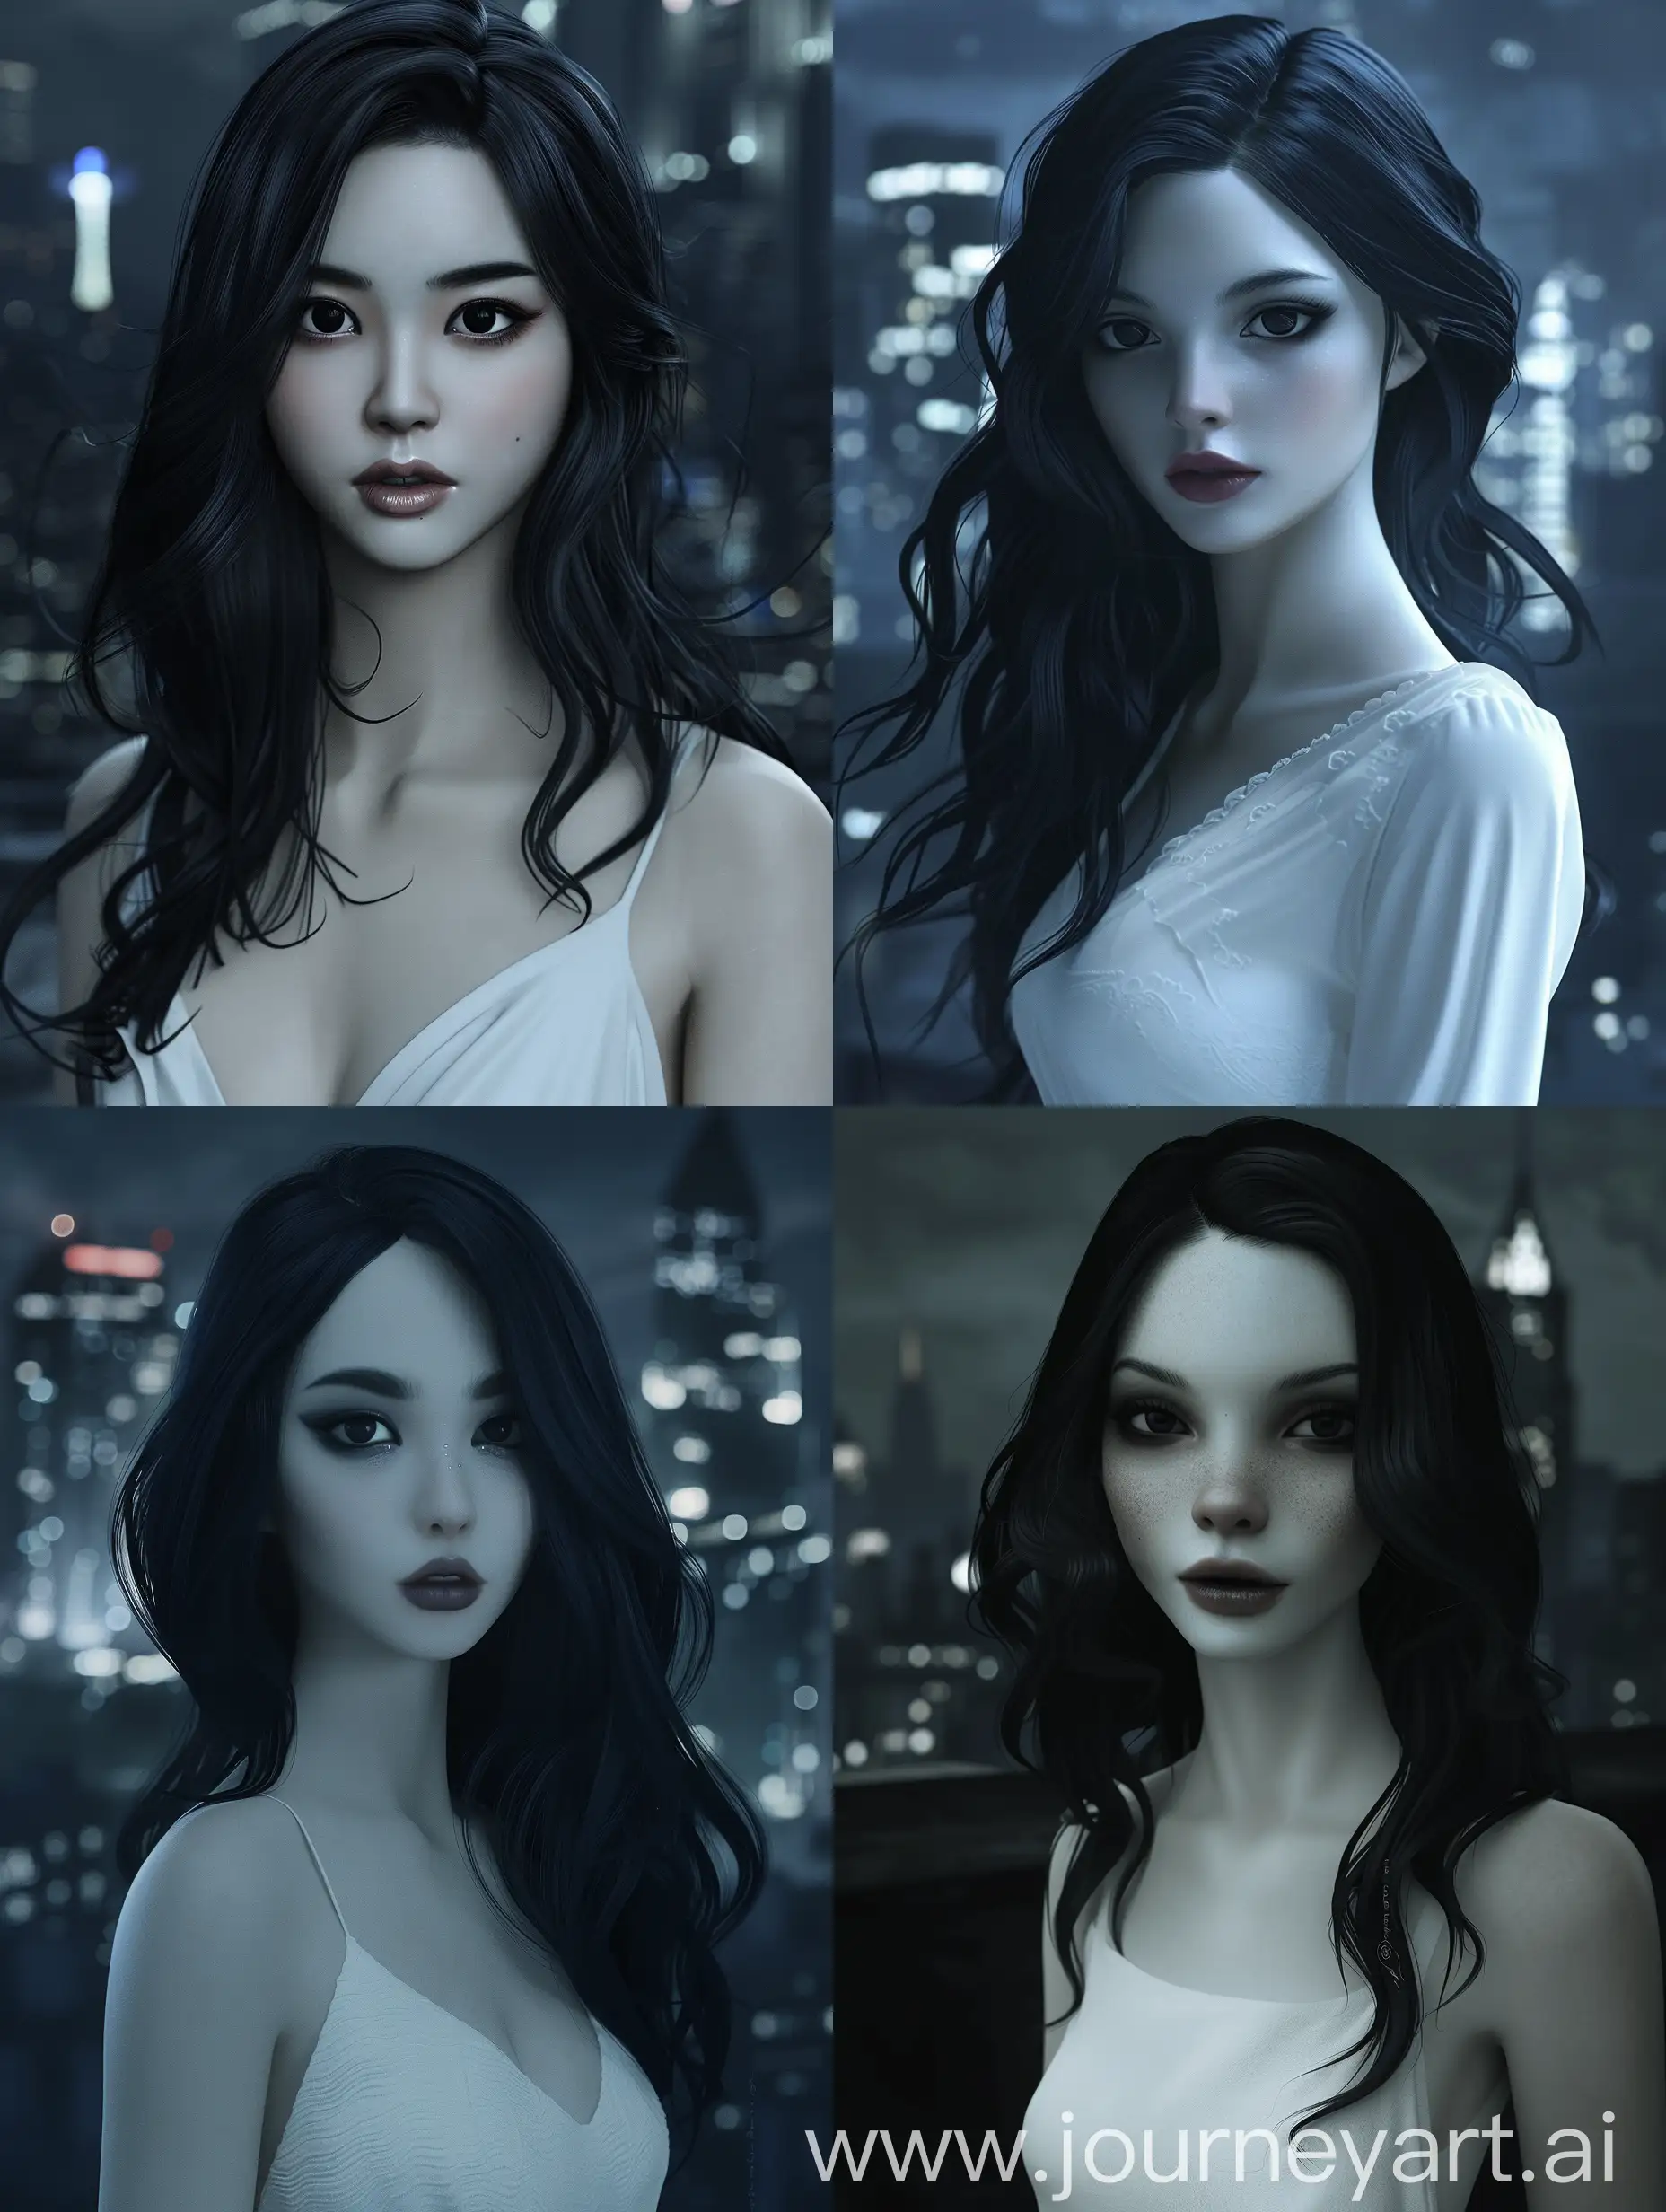 Draw me a woman with black, slightly wavy, long hair, black eyes, white skin, full lips and a small nose. She is wearing a white dress. In the background is a dark city. Make it in 3D realistic style.